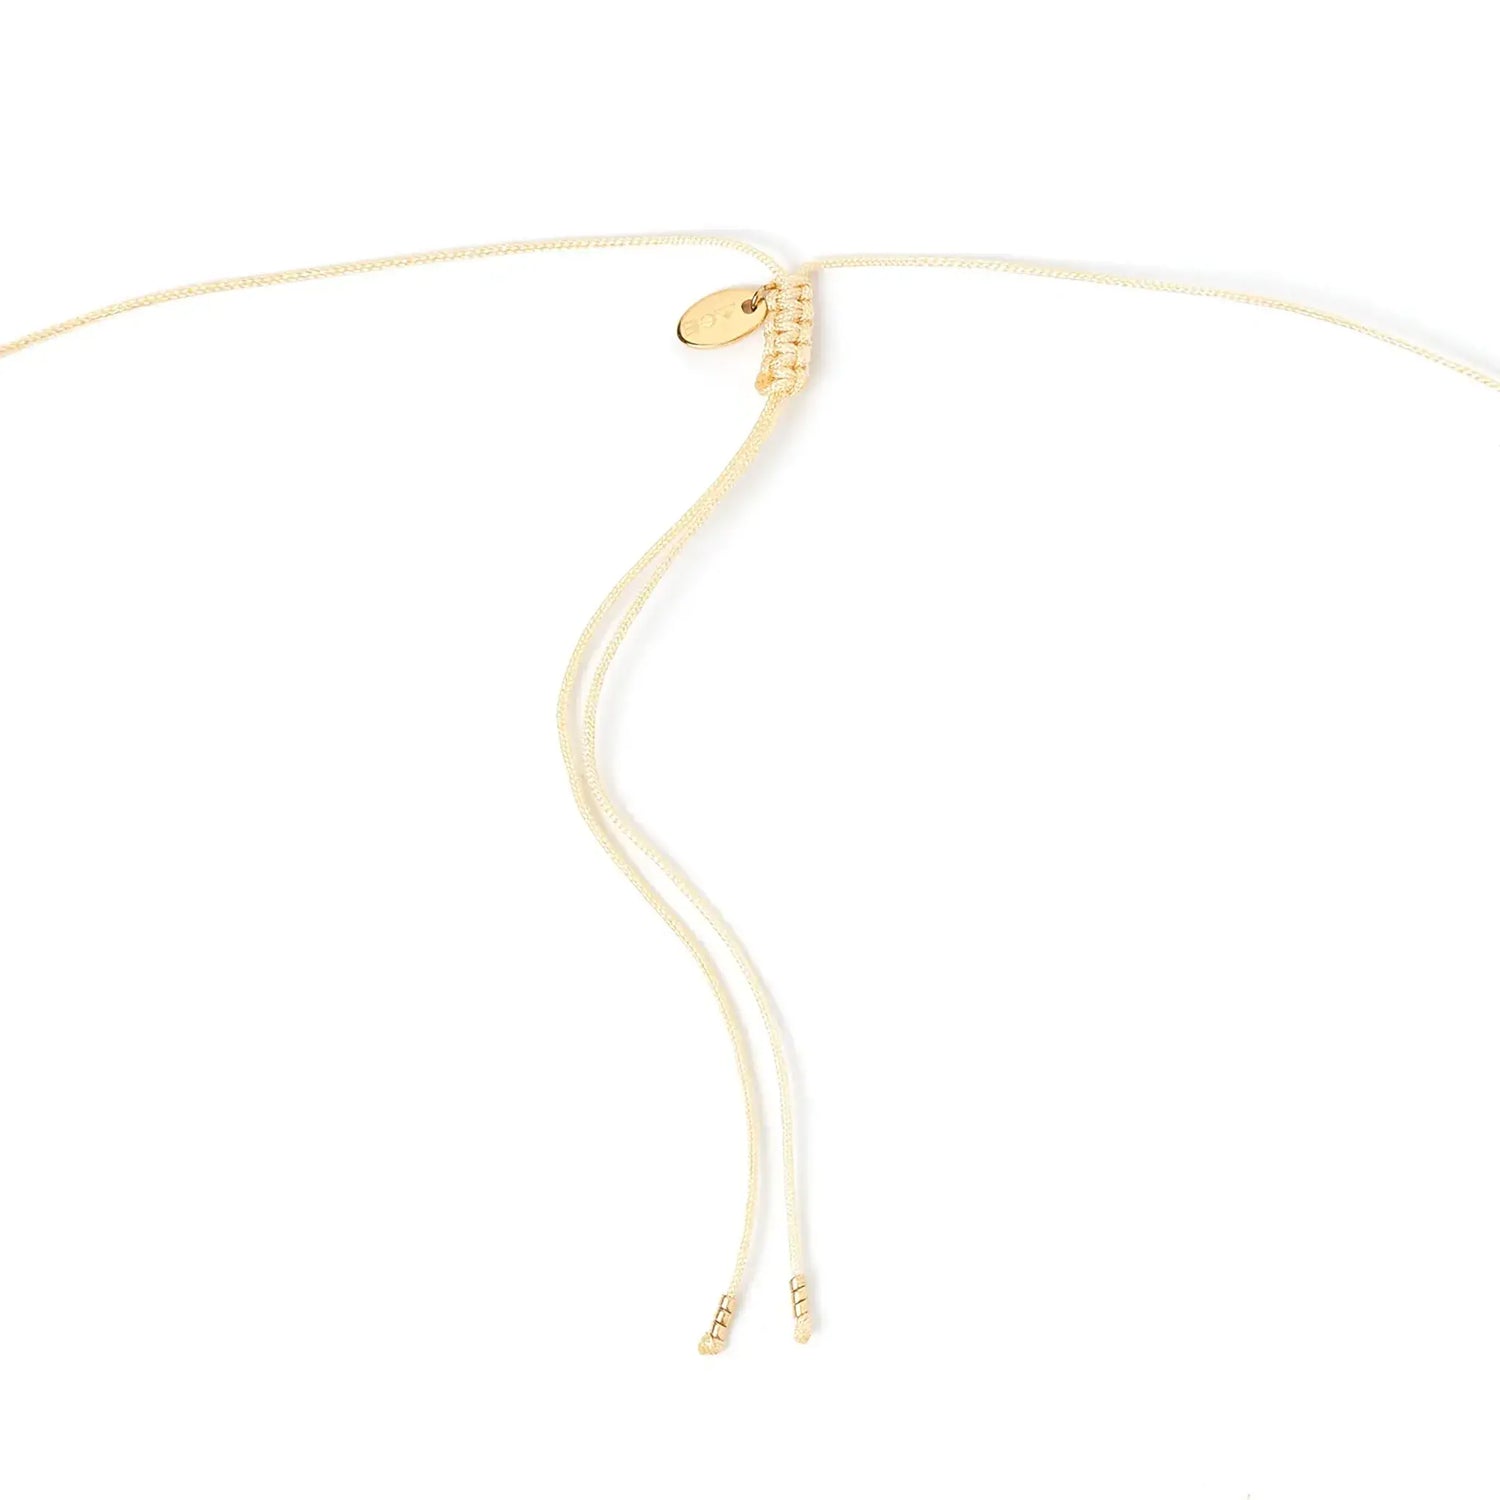 Marley Gold and Pearl Choker Necklace by Arms of Eve